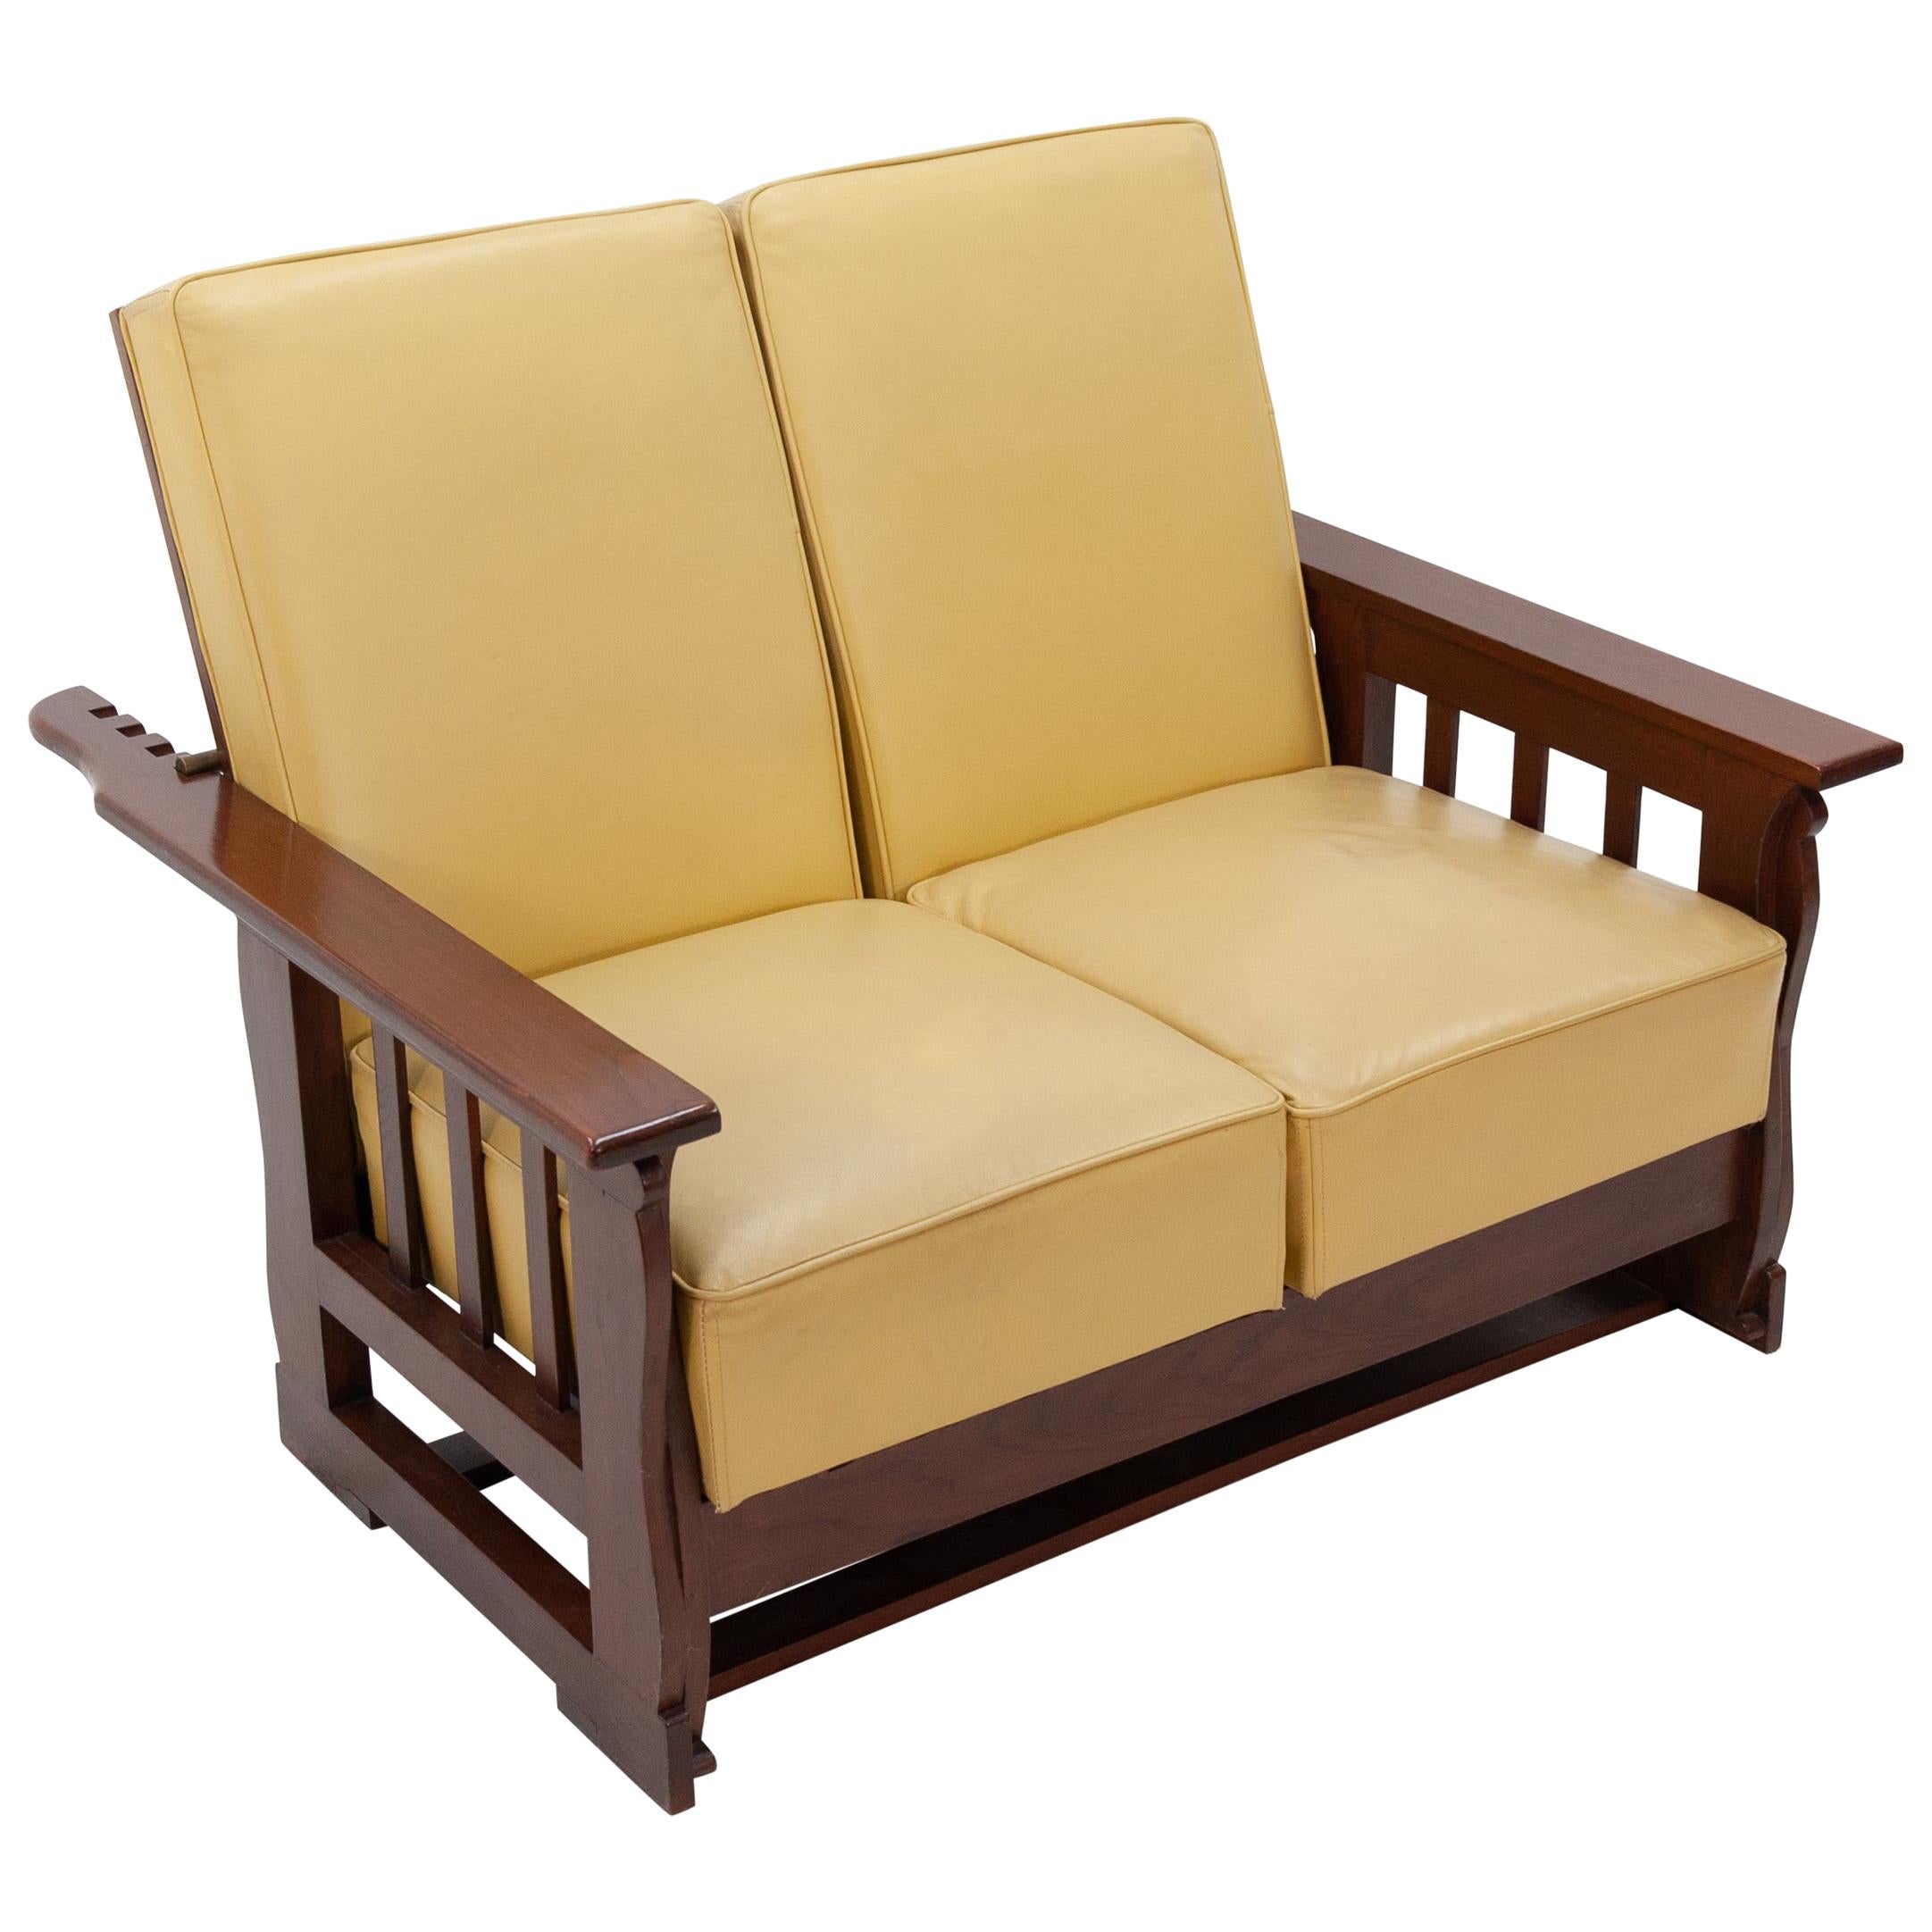 A  Morris chair for two  double Sofa recliner  